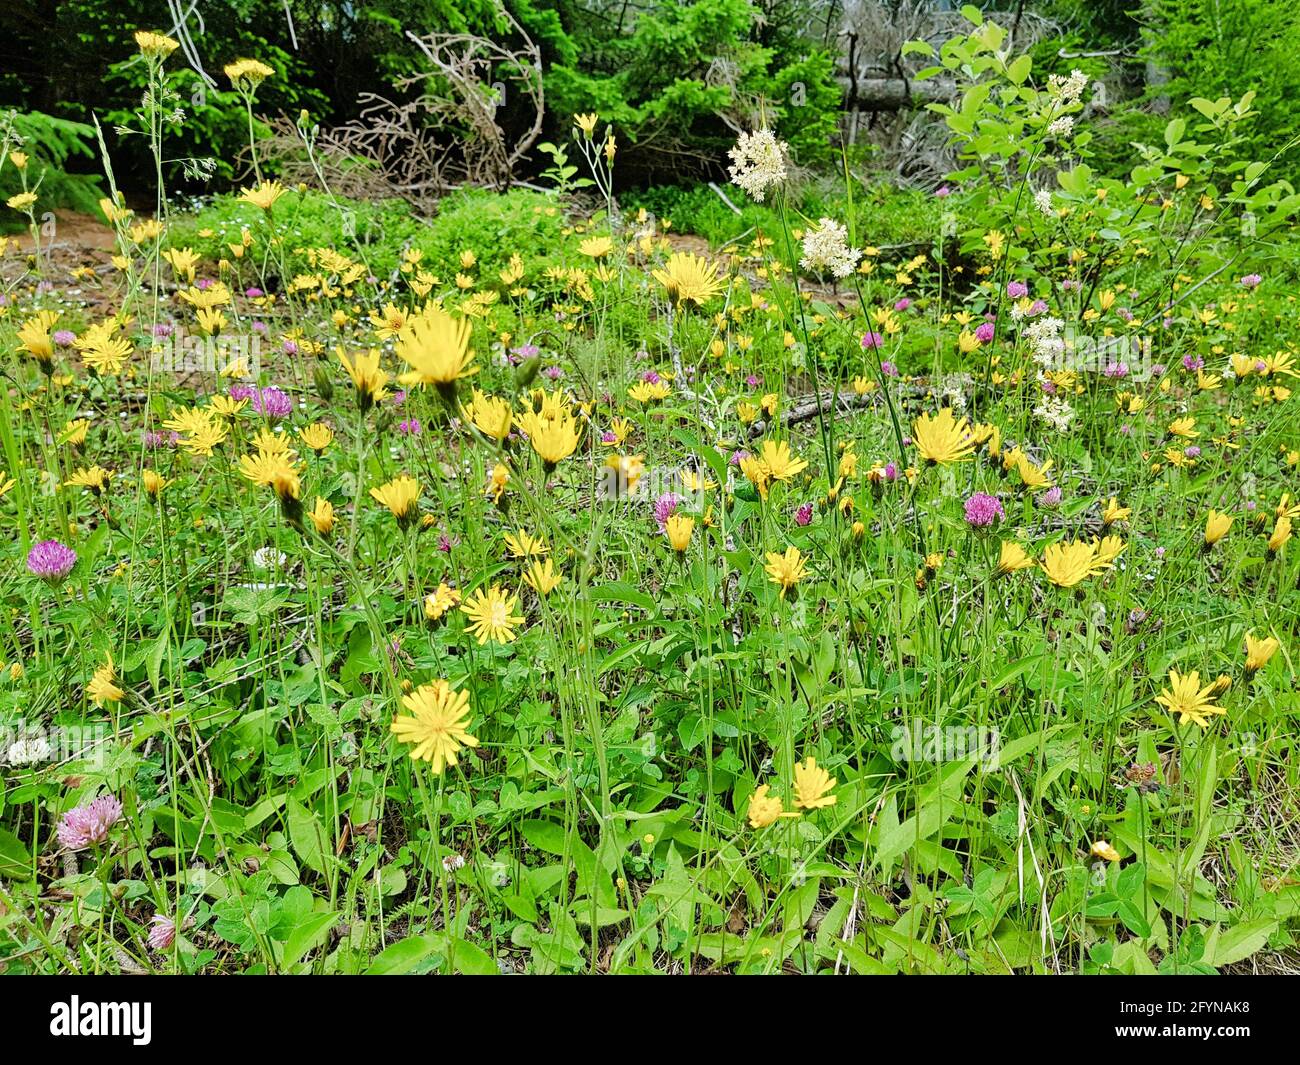 Flower field with green grass and dense trees in hills Stock Photo